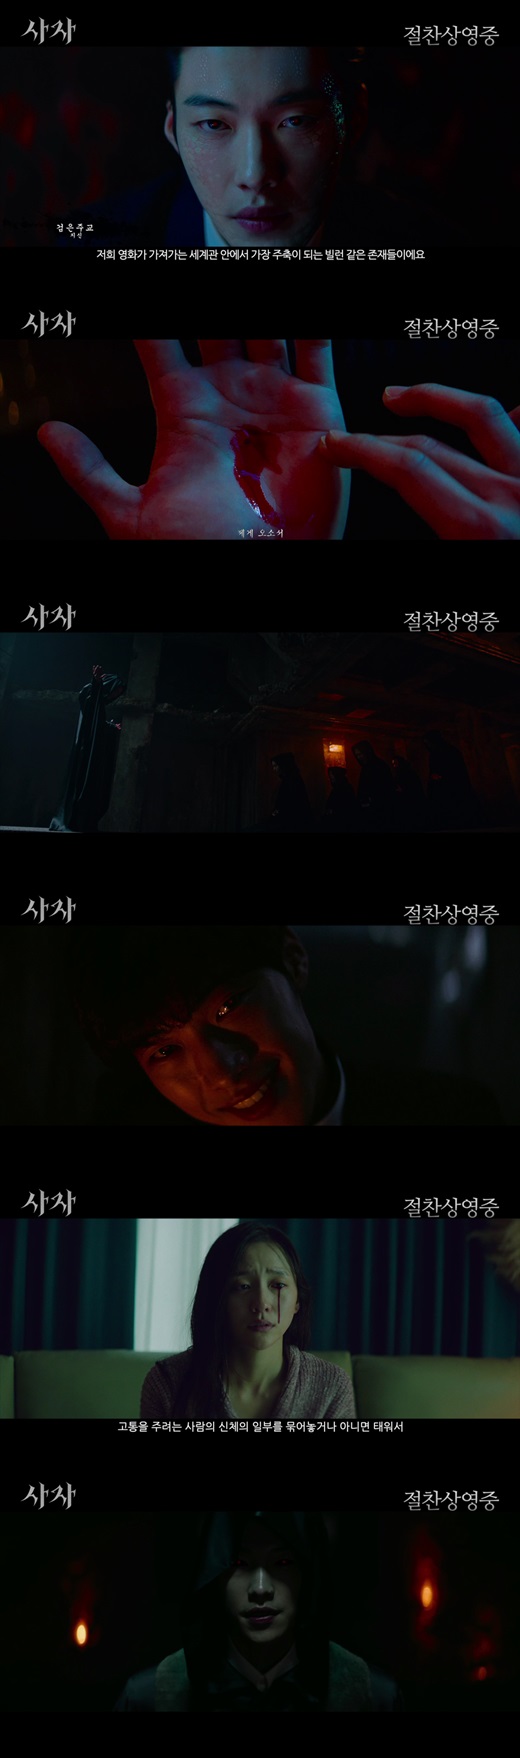 The movie Lion first released a SEK video of Lion Fantasy World - Part 1. The World of Evil, which can confirm World of SEK evil in the movie.The Lion is a film about the story of martial arts champion Yonghu (Park Seo-jun) meeting the Kuma priest Anshinbu (An Sung-ki) and confronting the powerful evil (), which has confLee Yongd World.While continuing to open the box office with intense attractions and fresh fun, it will reveal SEK images that capture World of evil completed with fantasy imagination and concentrate attention.First, director Kim Joo-hwan said, They are like Billen, who is the most important person in the movie. The black bishop Jishin overwhelms his gaze with intense visuals shining like red-tinged eyes and snake scales.The appearance of a secret consciousness toward the existence of evil by a black magic using supernatural power for malicious and selfish purposes amplifies the curiosity of the SEK ability of the earth in the movie.Here, director Kim Joo-hwan said, It is a secret person who approaches people who are not believed or have a weak mind and seduces them. The appearance of Ji-shin, who has excellent talent to penetrate and Lee Yong the weakness of the opponent, approaches the child in danger, doubling the tension of the viewer.Kim Joo-hwan, director of the Jishin, who devotes his soul to the underground altar and threatens his father with pain, said, It is a tool like black magic that can Lee Yong pain to the person at a distance by tying or burning a part of the body of the person who curses, harms or tries to Lee Yong pain.The lion, which has built up World of evil through such colorful settings and doubled the fun of the movie, captivates the audience with intense and new attractions that stimulate fantasy imagination.